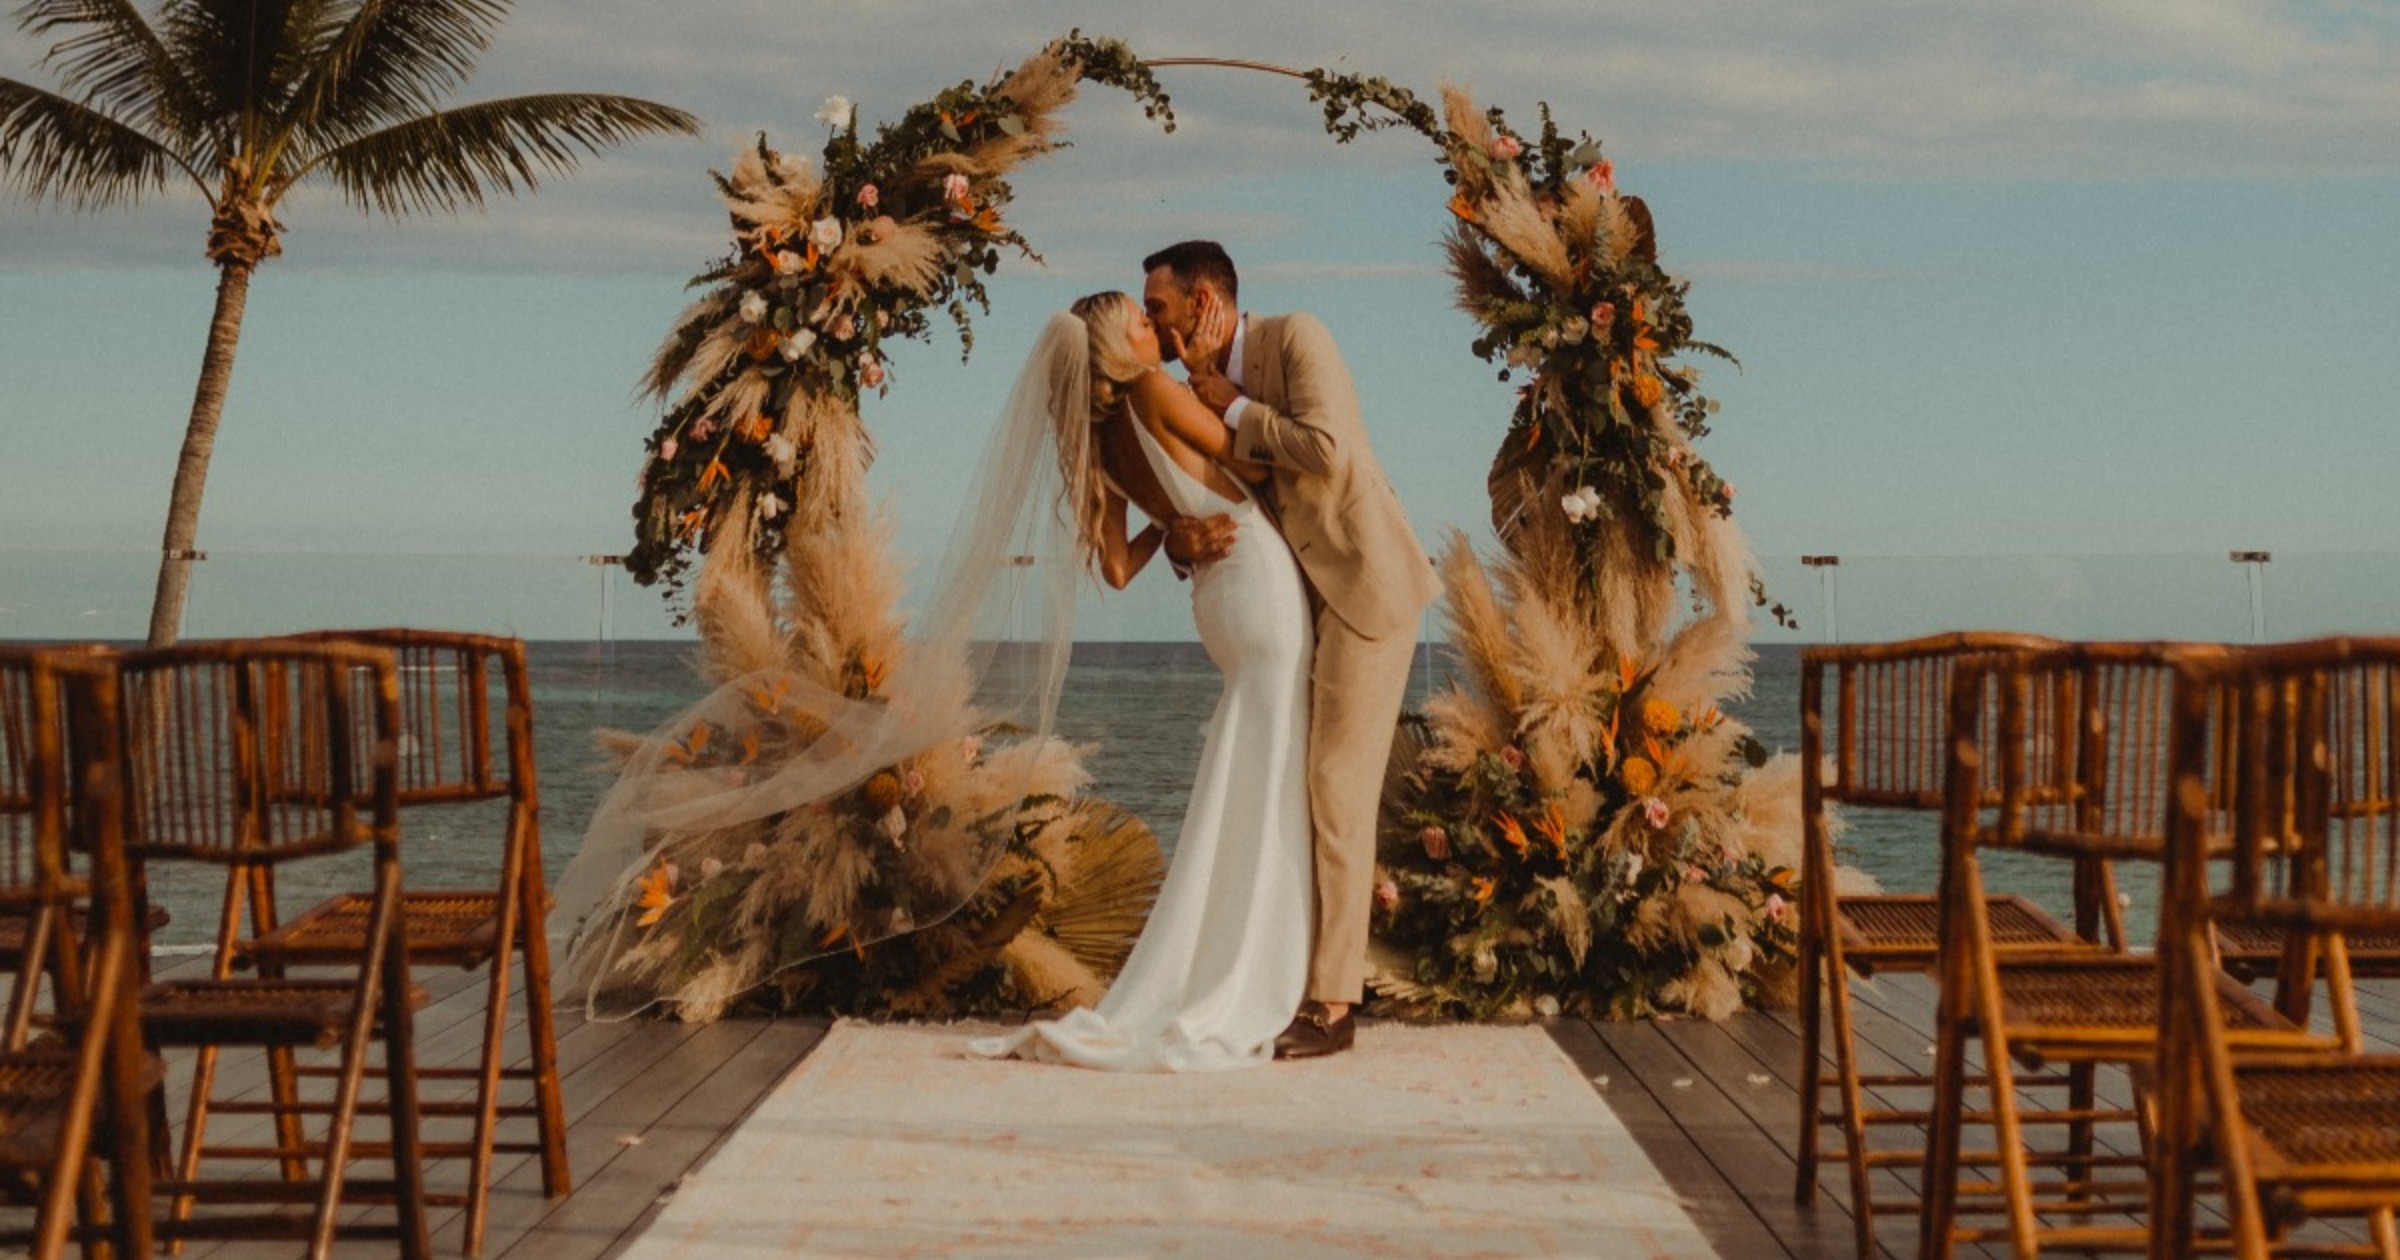 A sentimental wedding in Tulum that honored friends and family